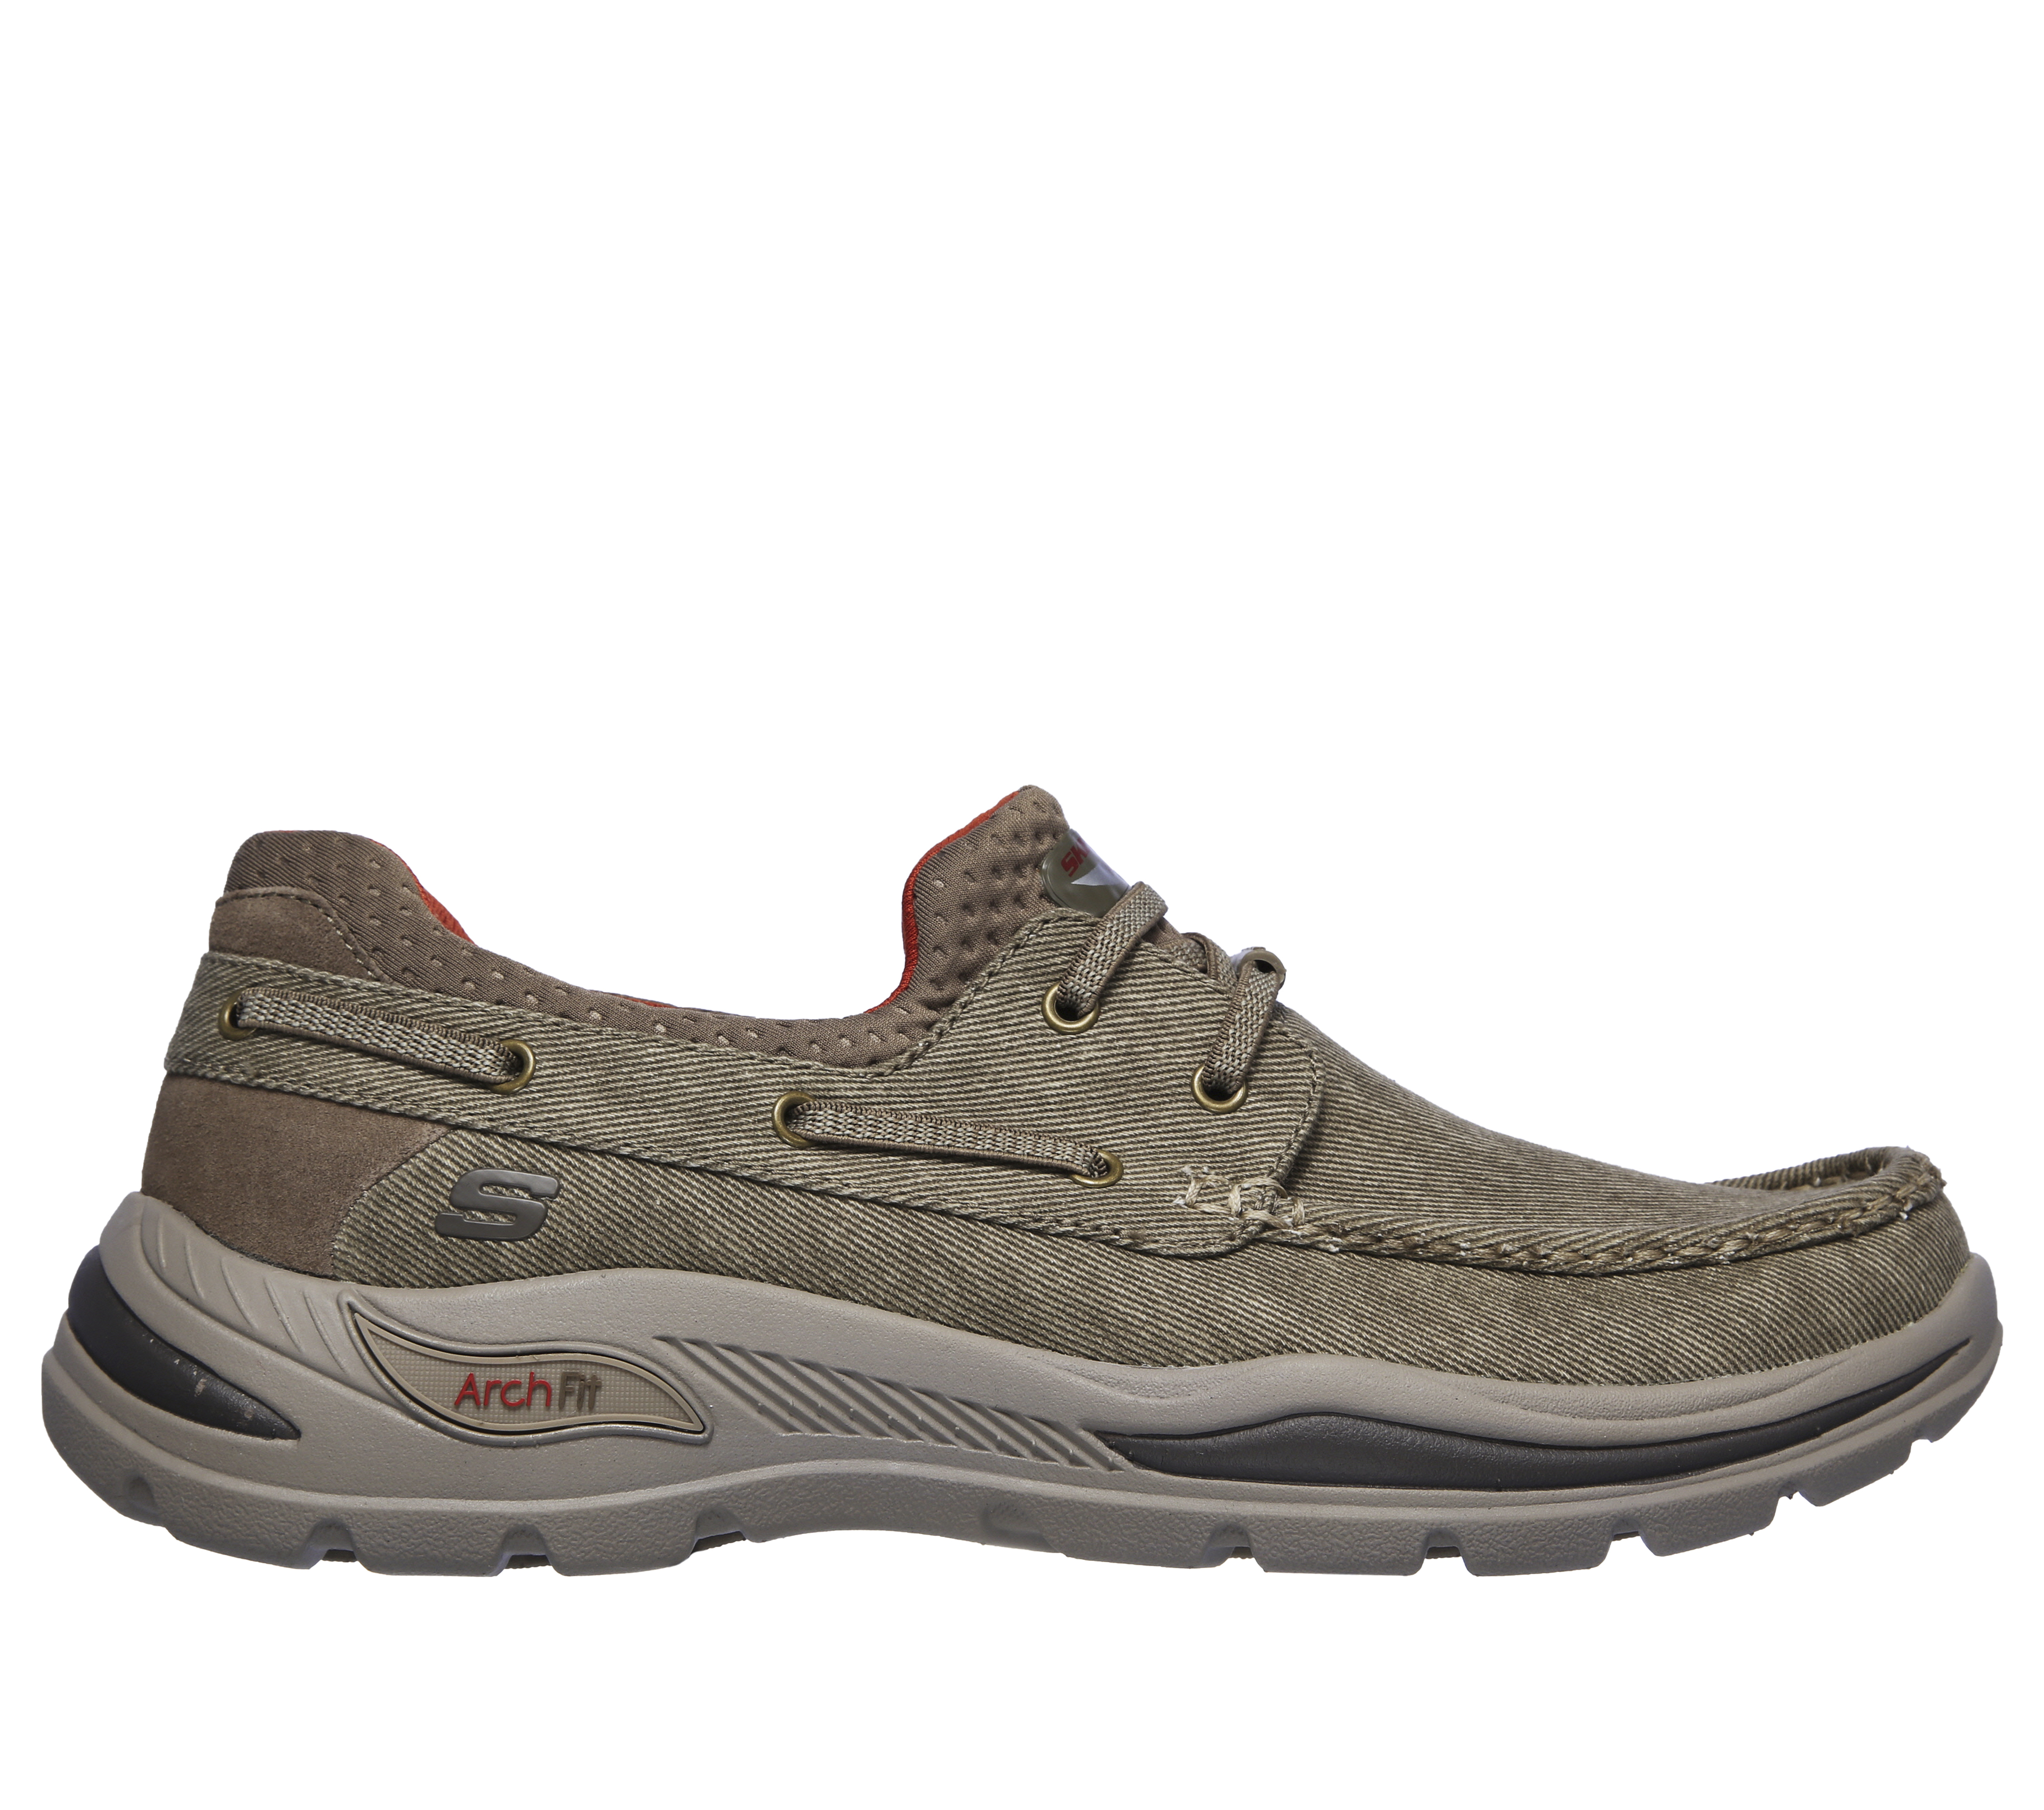 Shop the Skechers Arch Fit Motley 